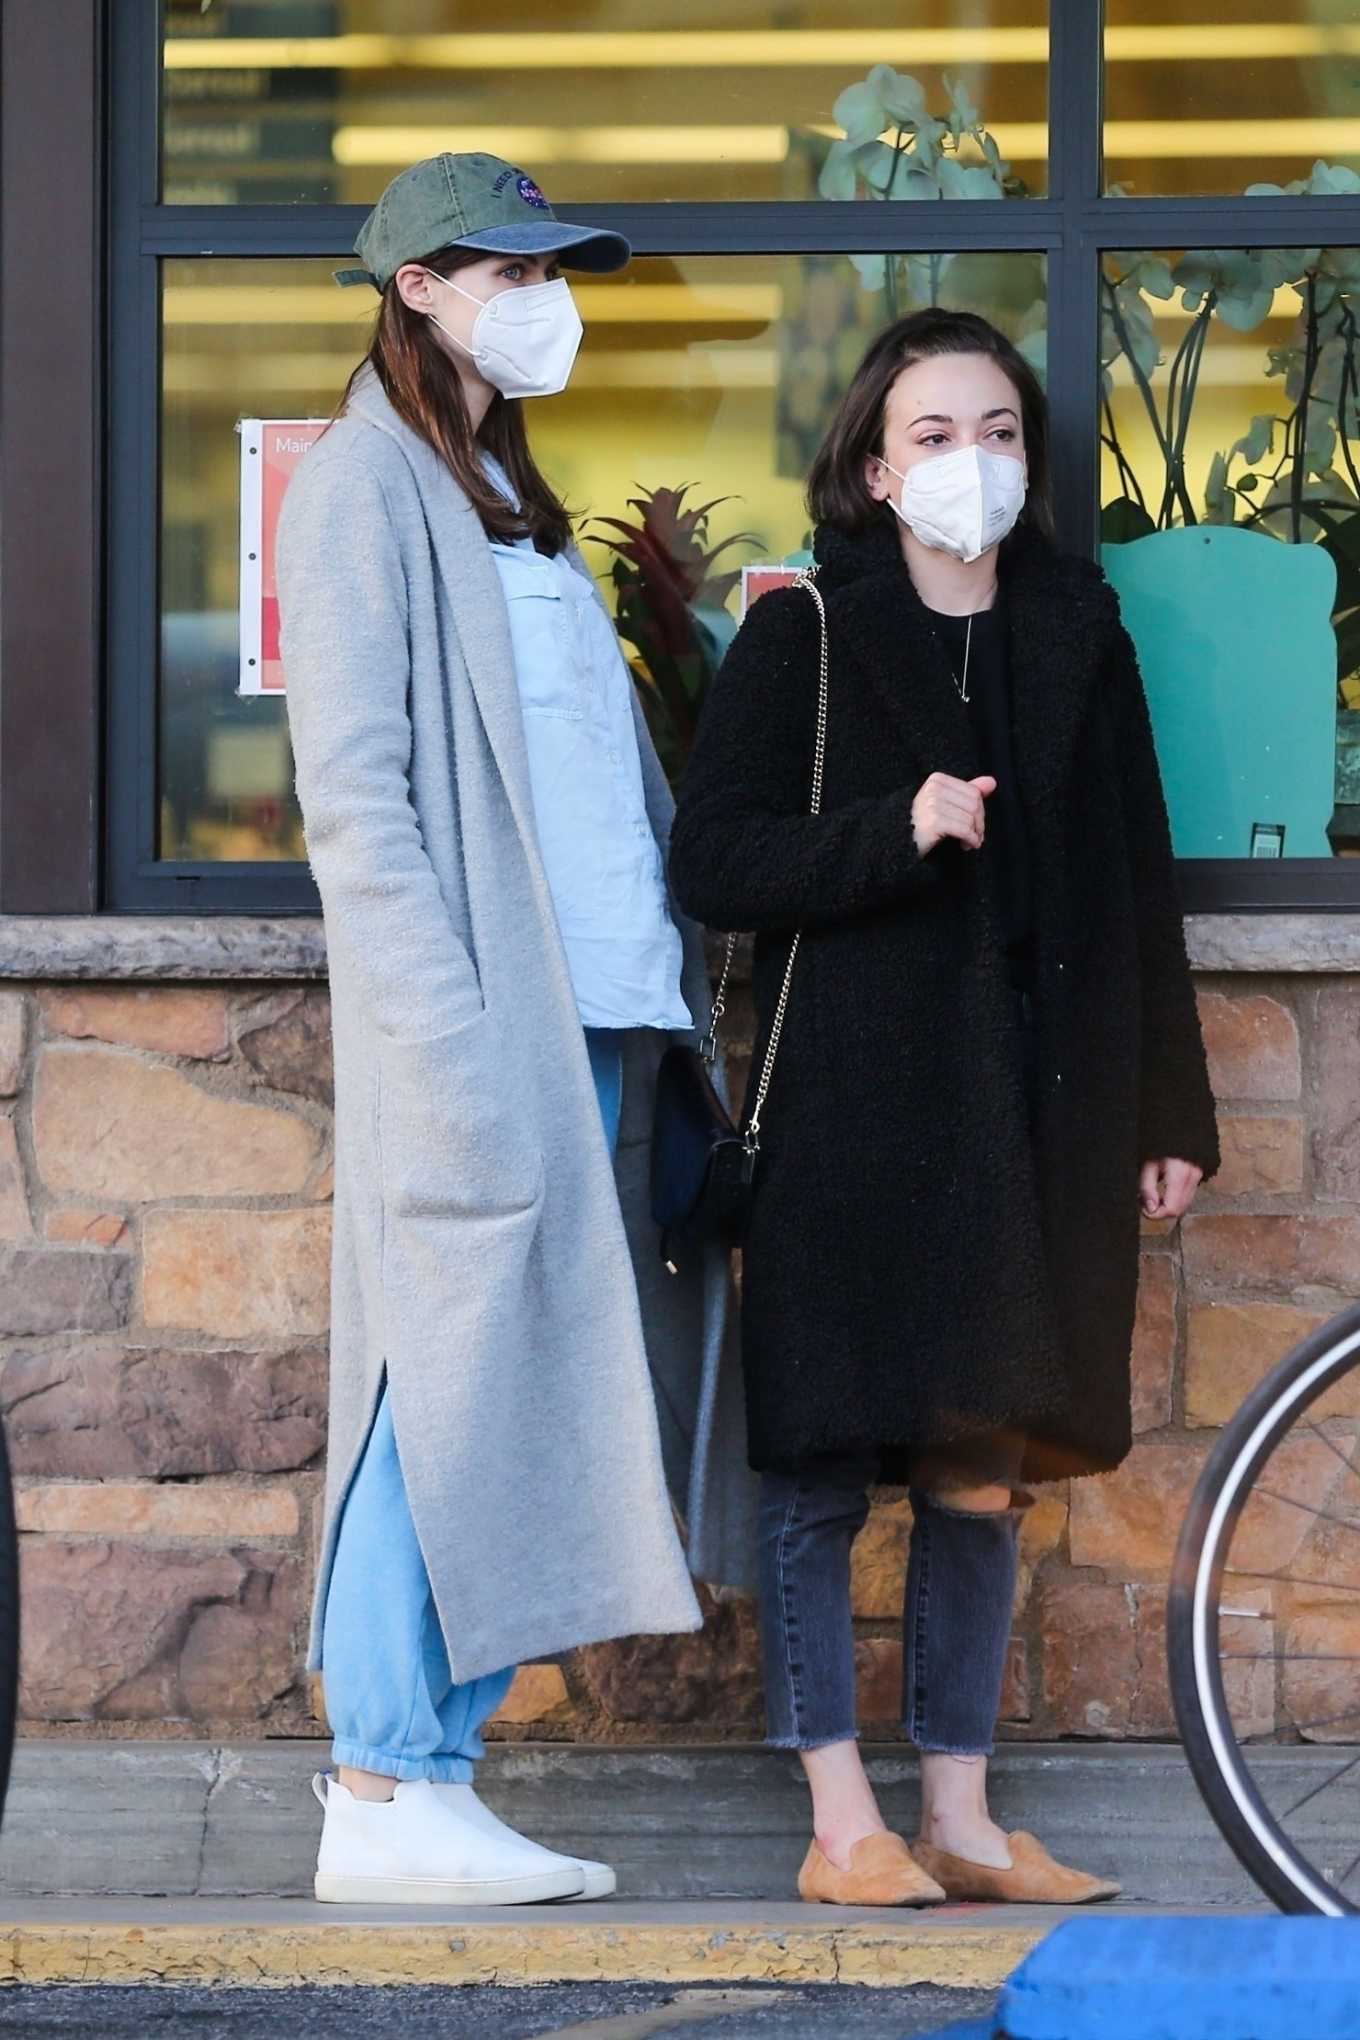 Alexandra Daddario â€“ Dons a face mask while shopping in Los Angeles